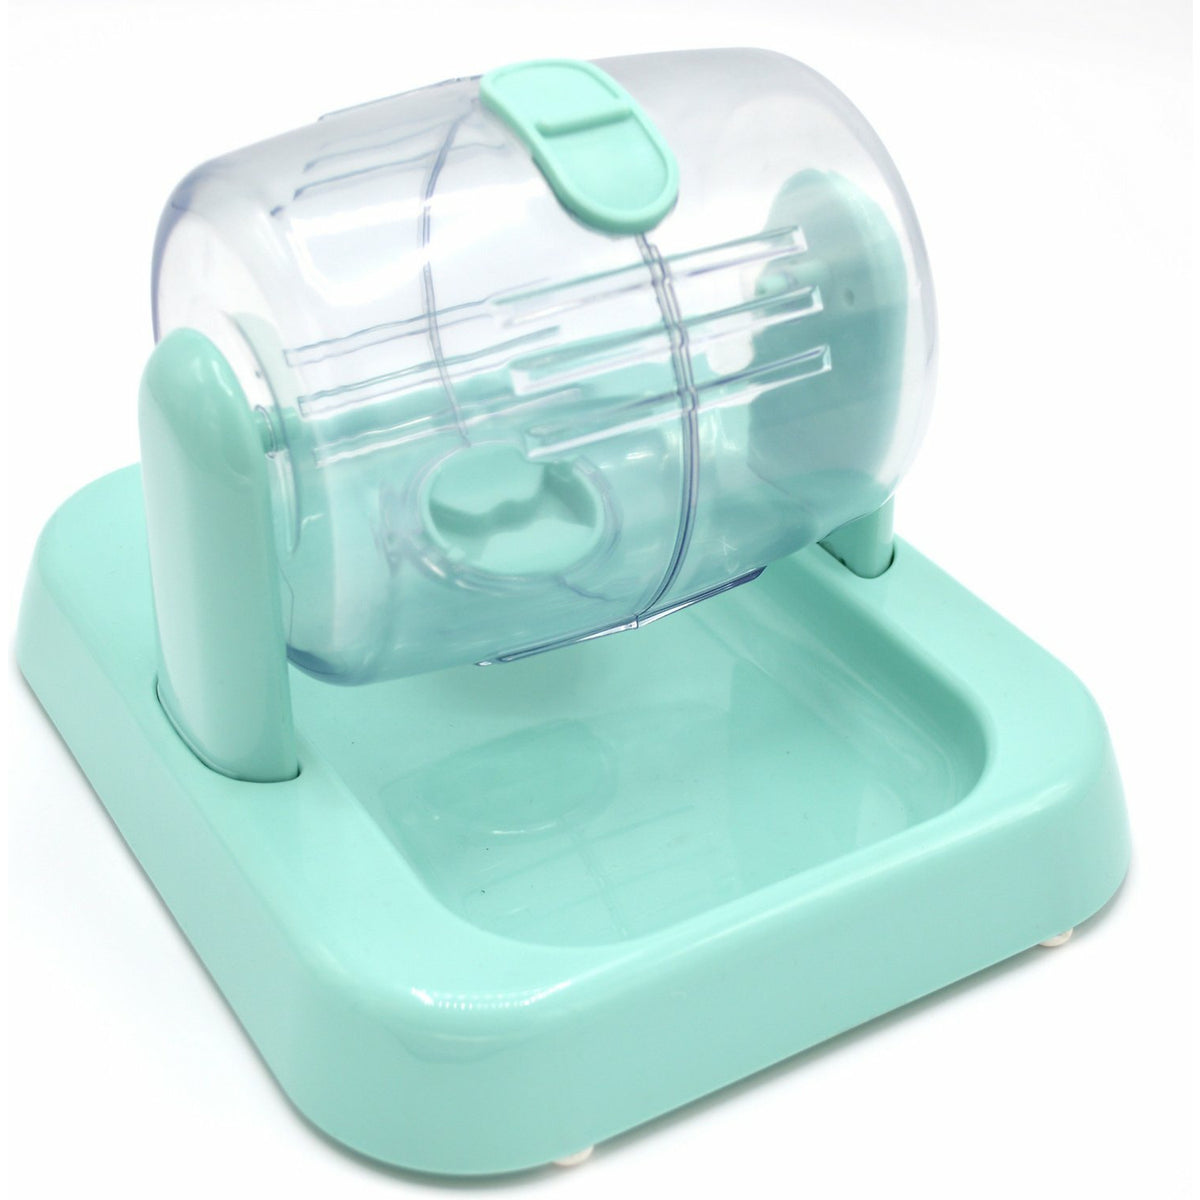 Oxbow Enriched Life - Rolly Teaser Feeder Toy for Small Animals